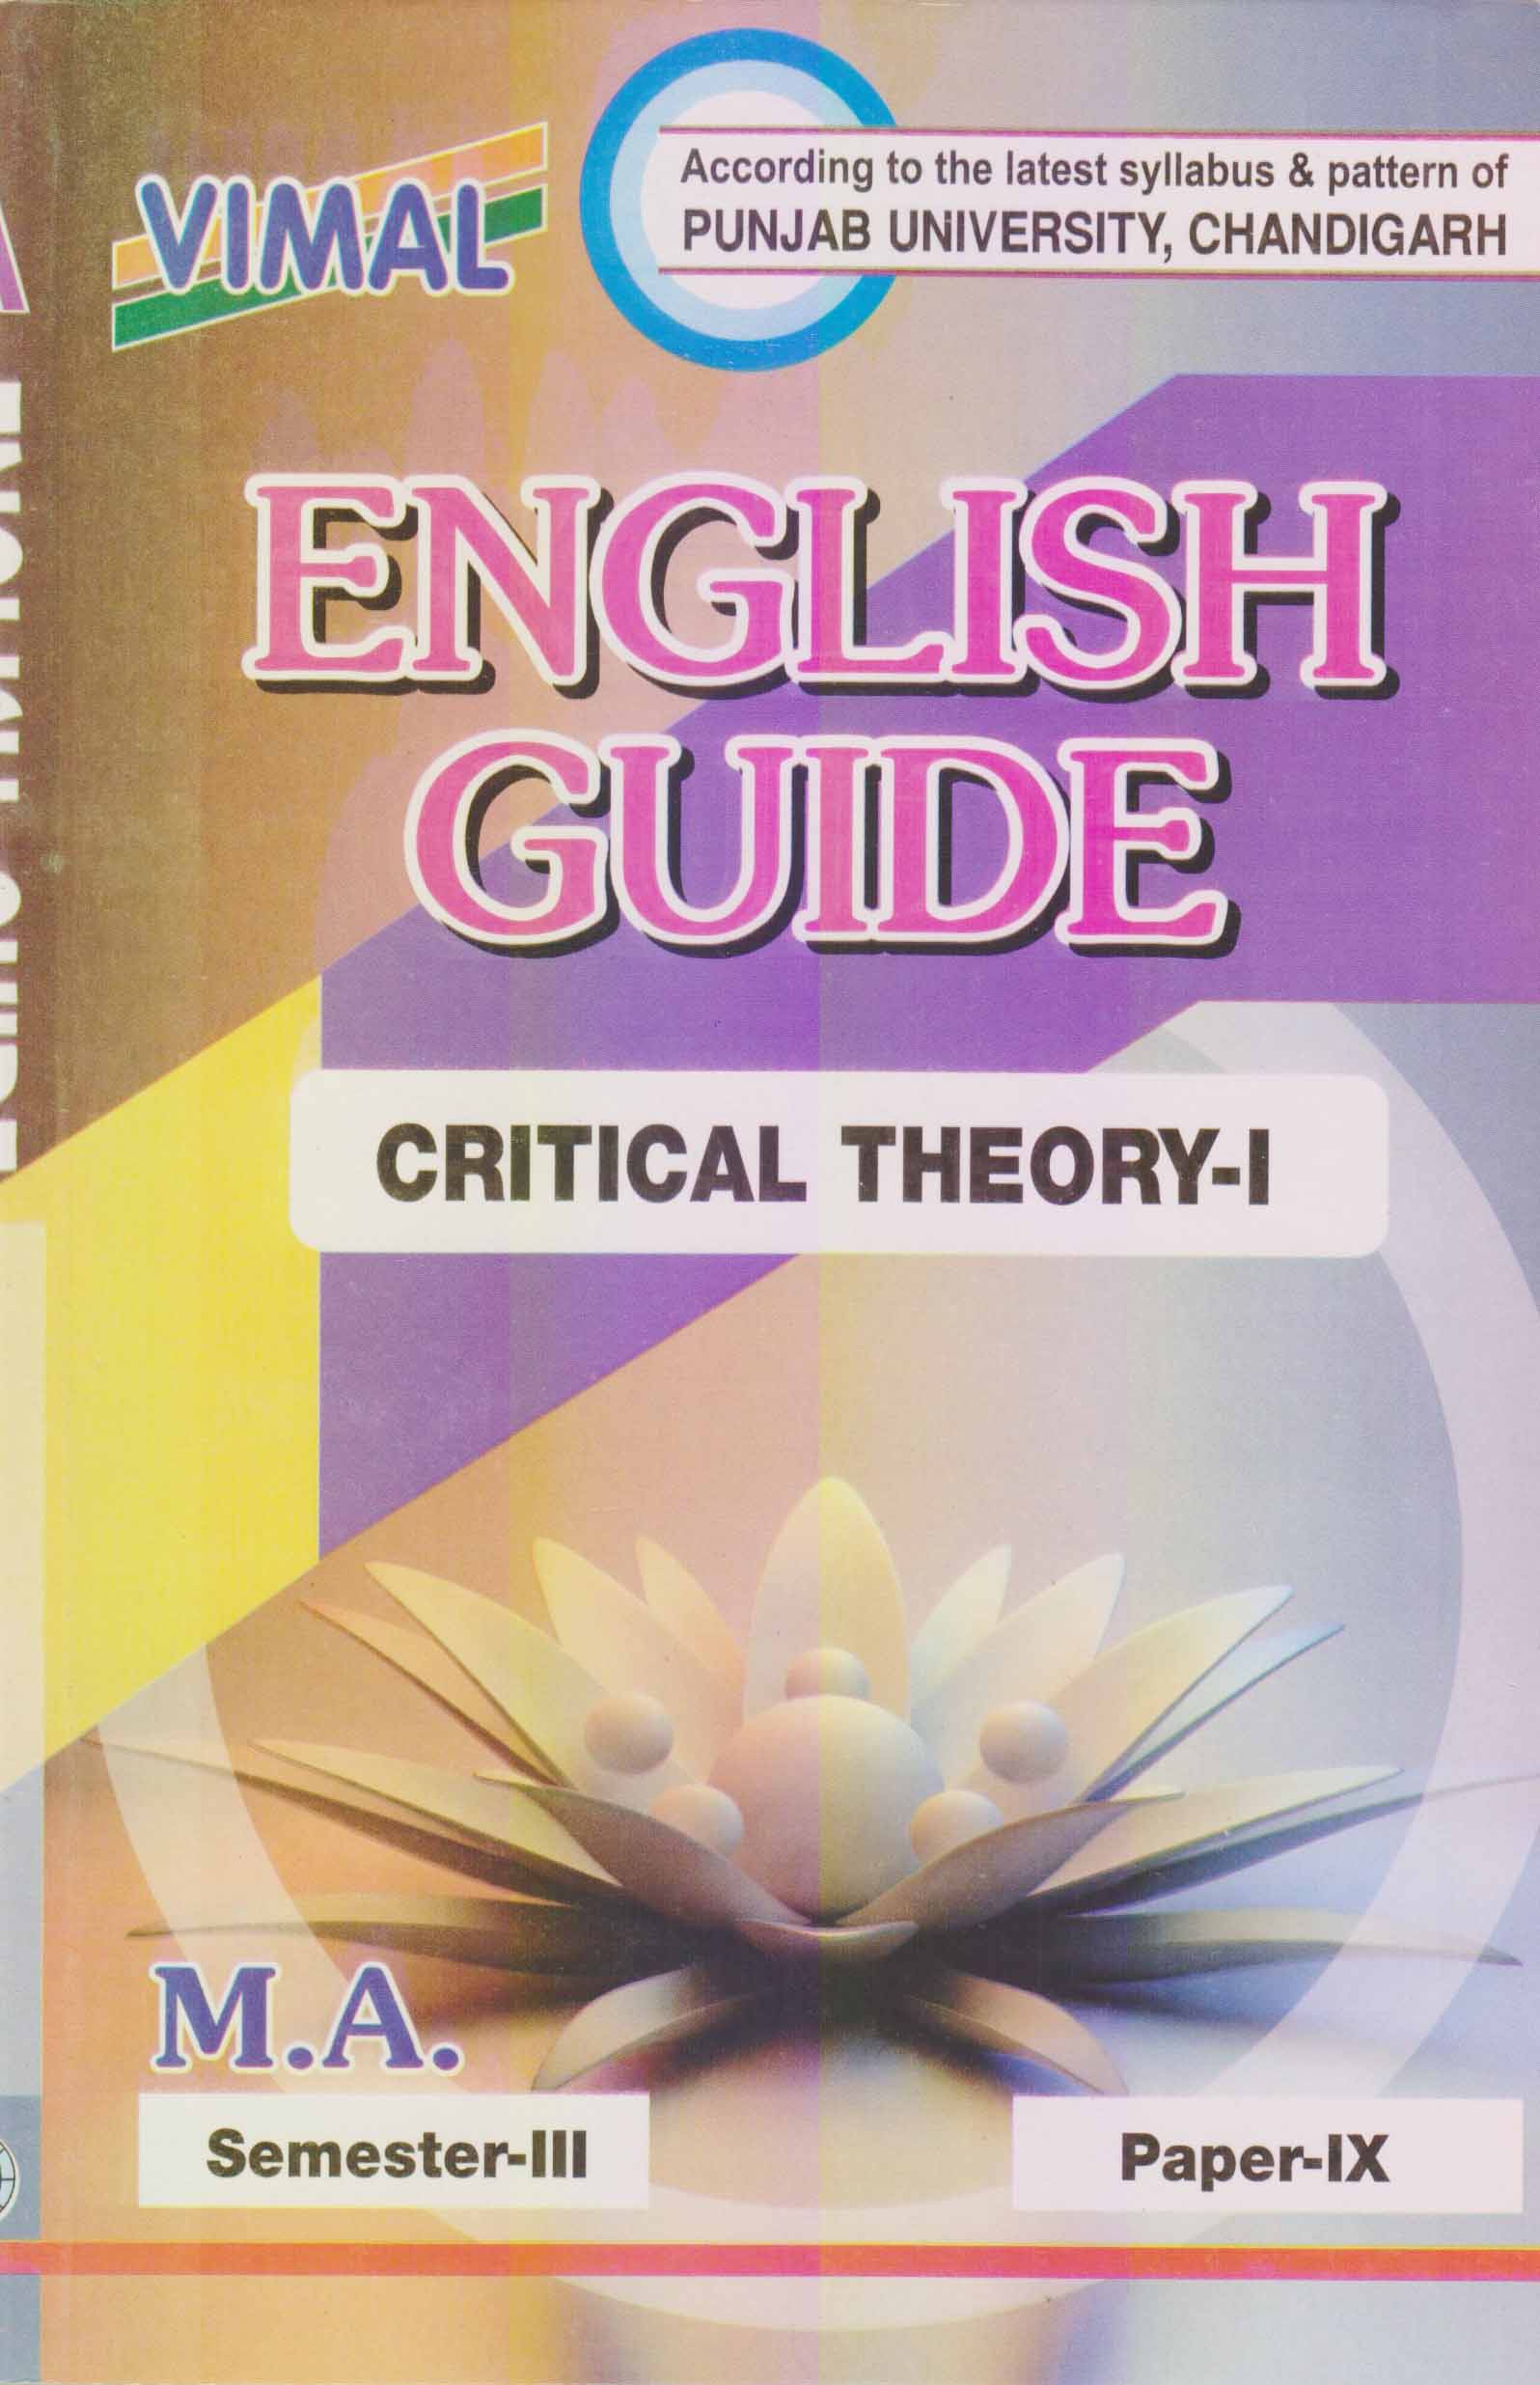 Vimal English Guide Critical Theory -1 for M.A. Sem. 3, (Paper IX) New Edition